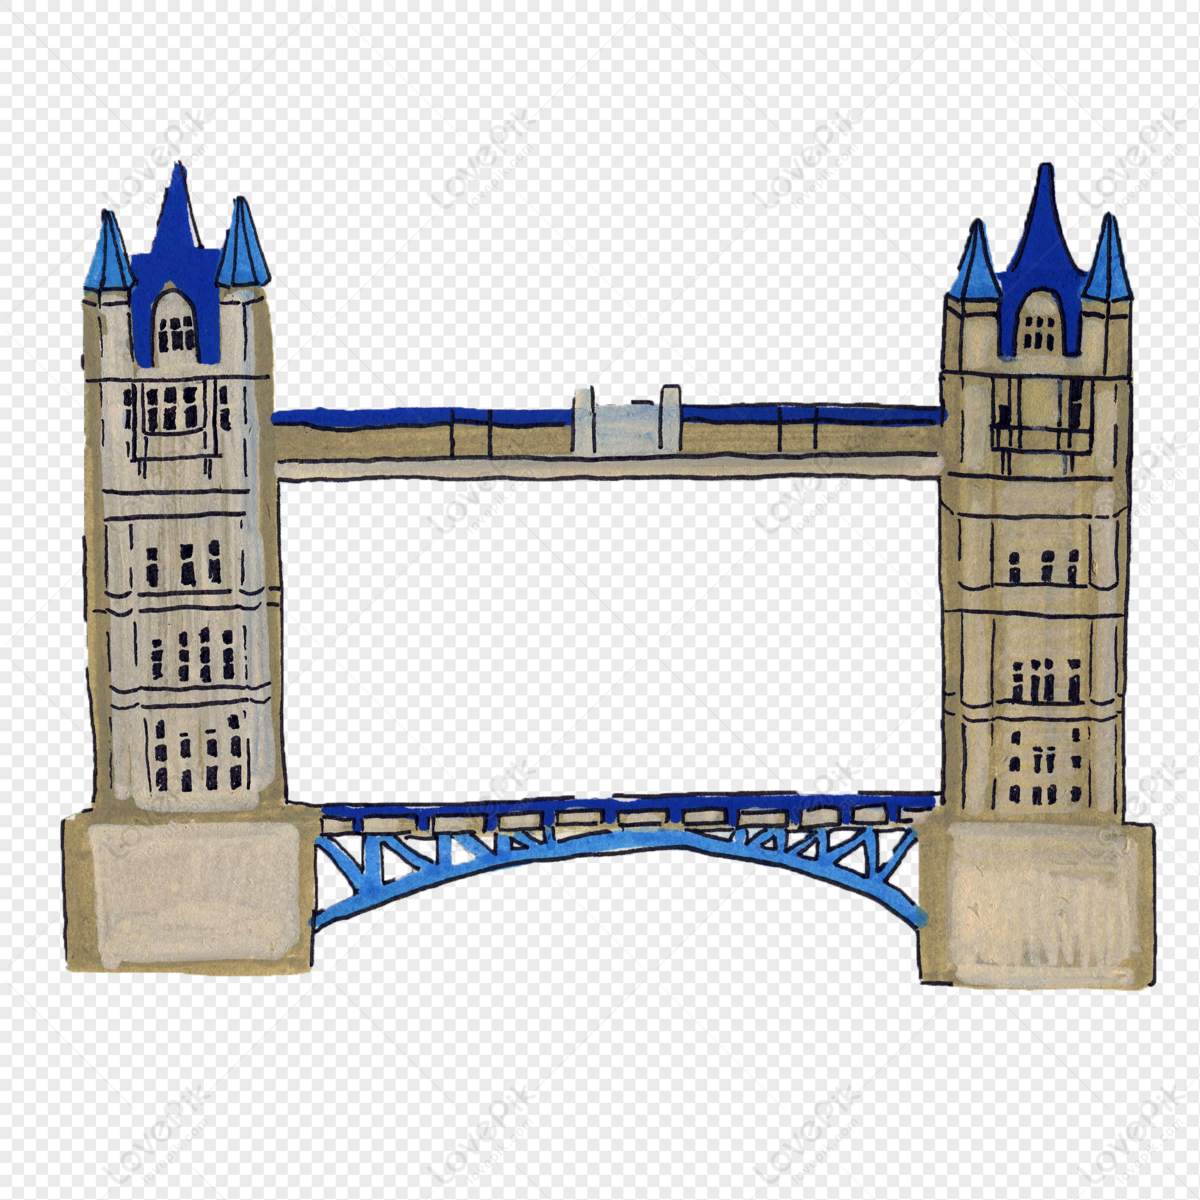 London Bridge Png Transparent And Clipart Image For Free Download - Lovepik  | 401370526